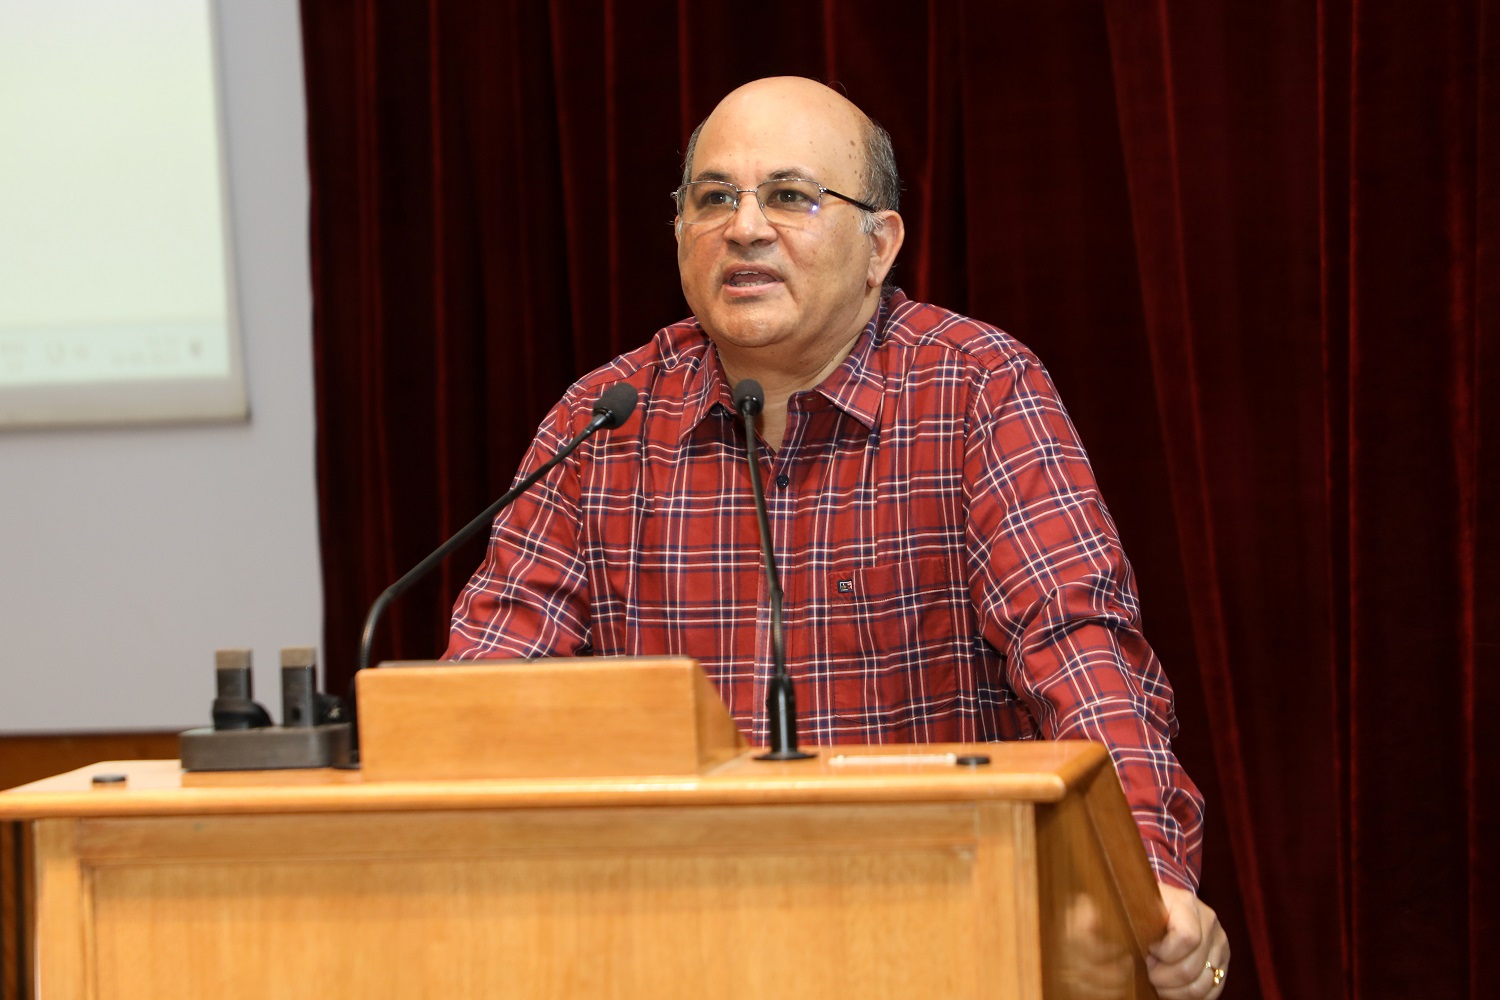 Prof. Rishikesha T Krishnan, Director, IIMB, encouraged the students to bring their wide industry exposure and experience to the class through their perspectives and insights, at the inauguration of the EPGP Program on 25th March 2023.